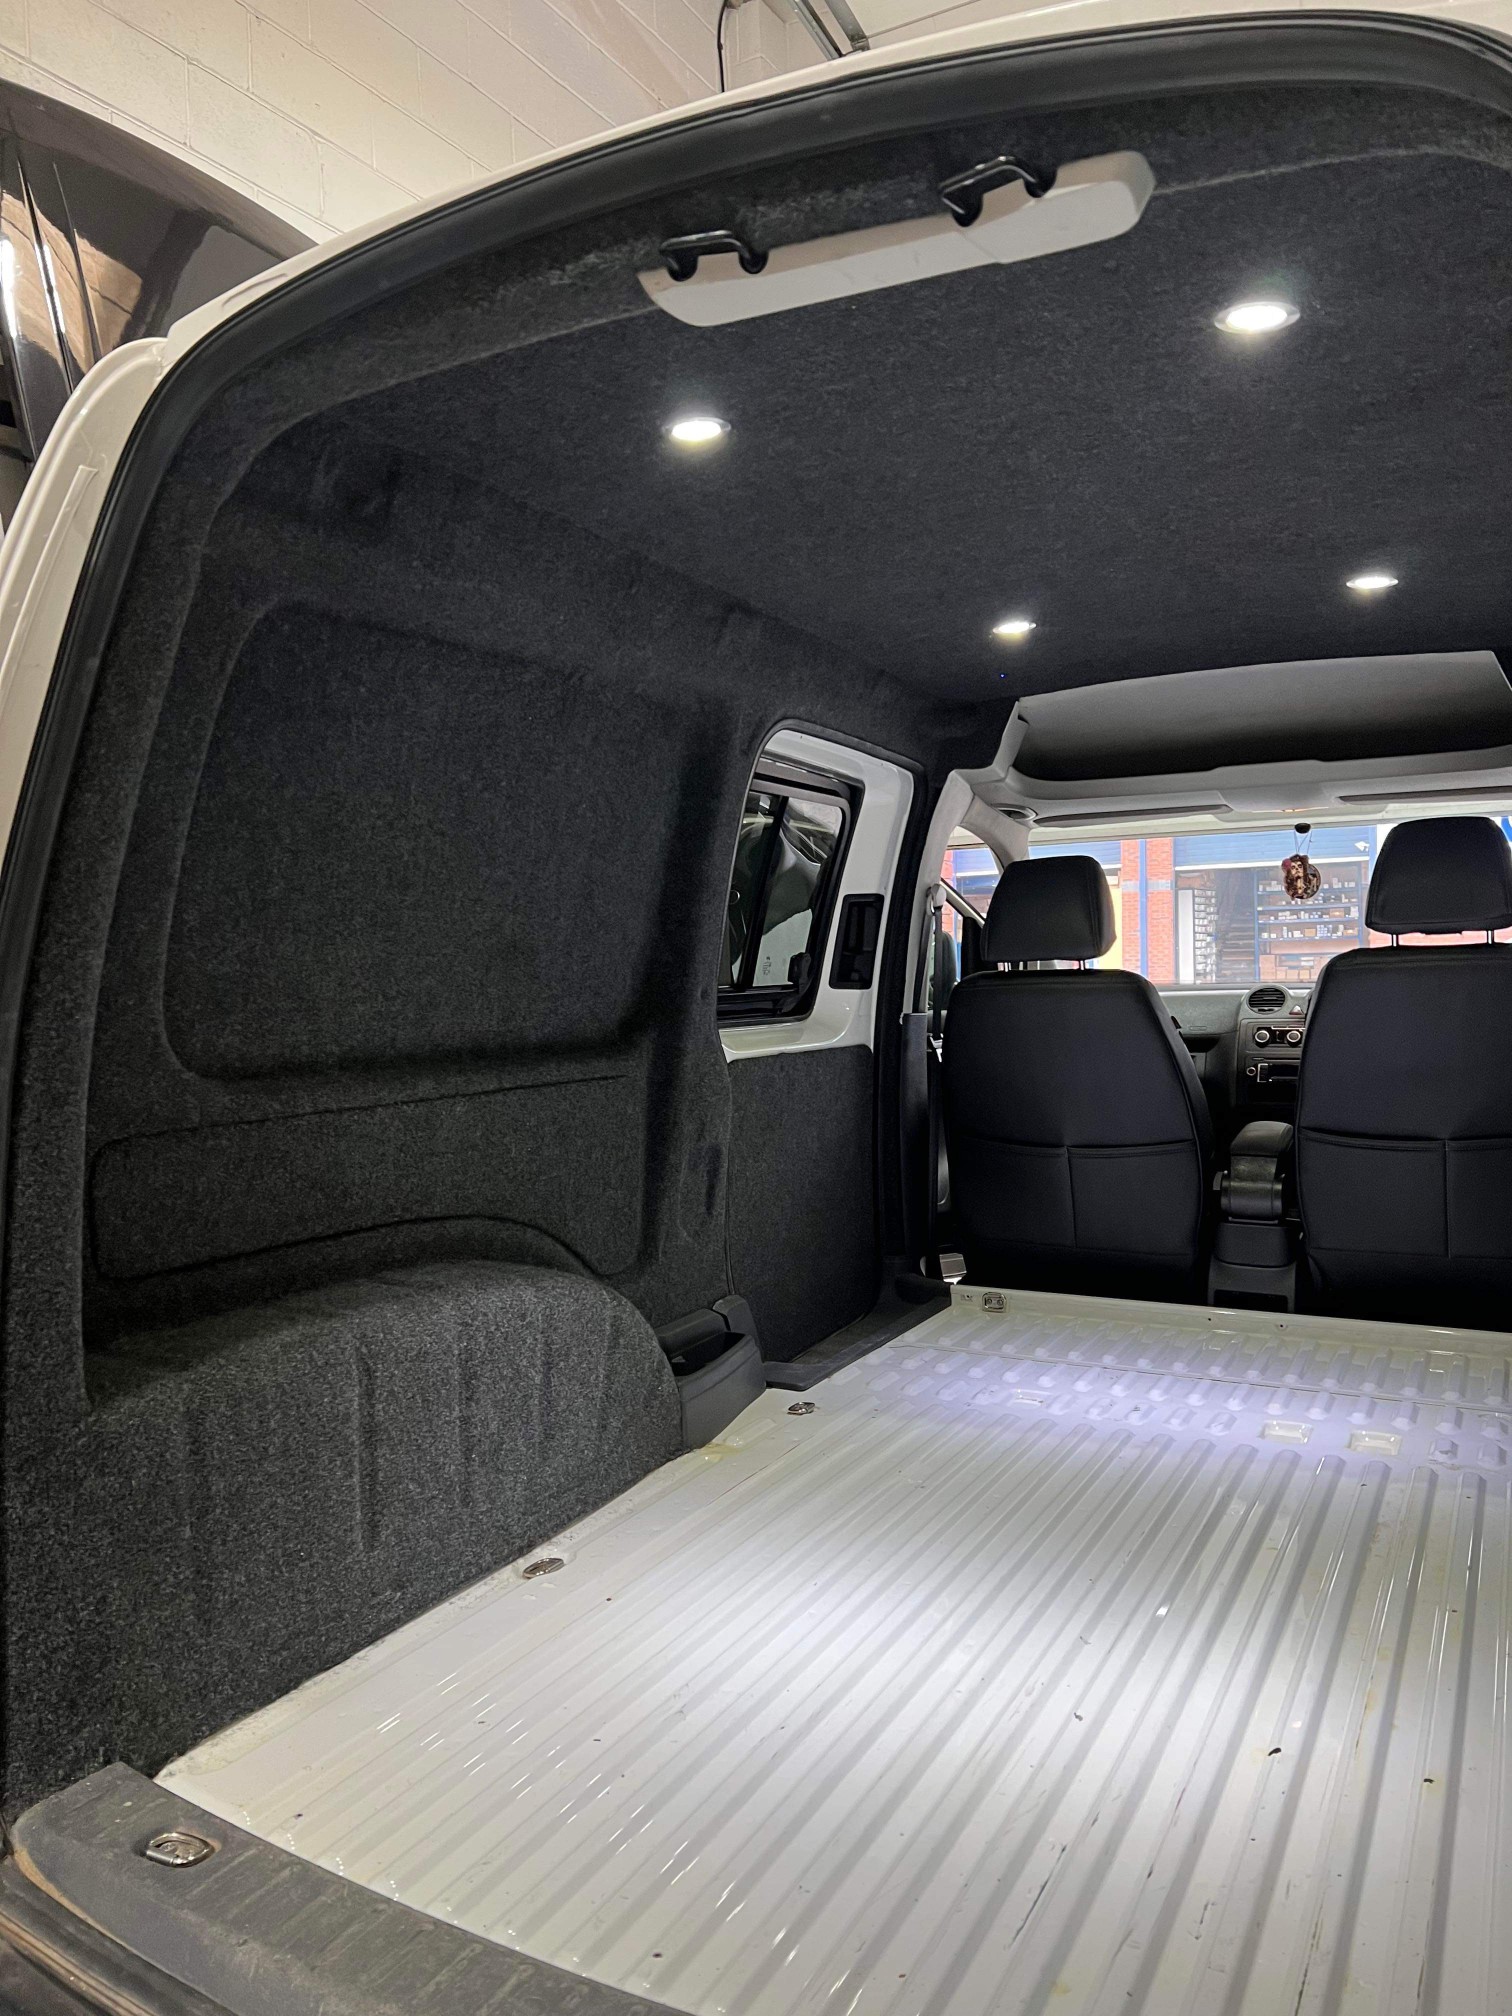 VW Caddy, Windows, insulation, carpet, lights, floor and Altro flooring, fit ( (5)